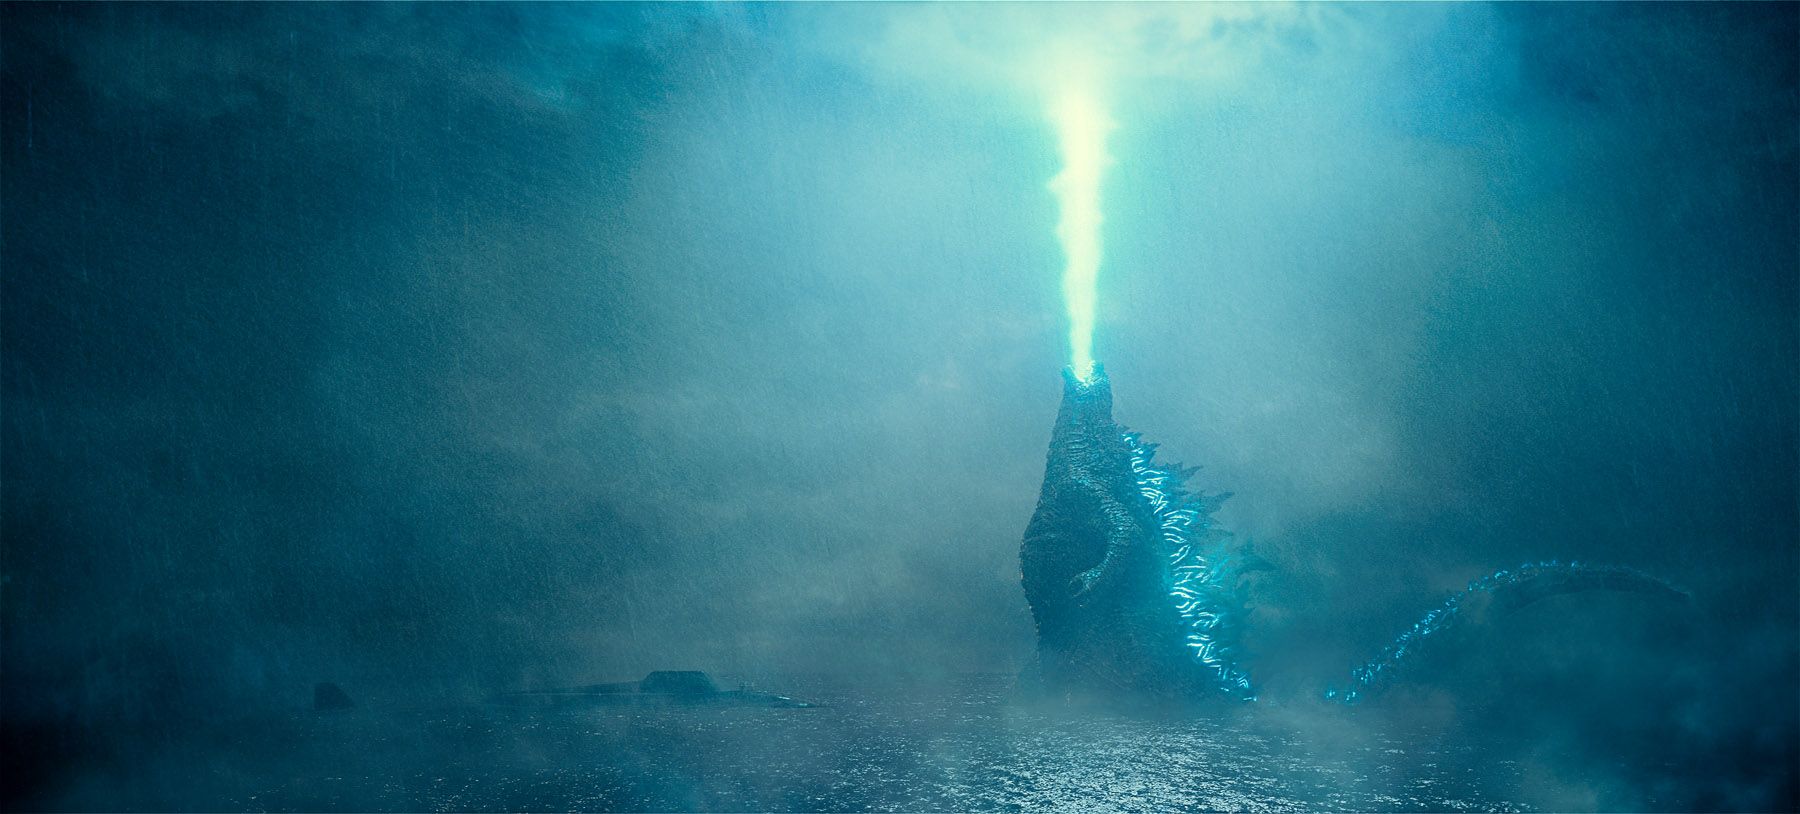 Godzilla Rises And Unleashes His Atomic Breath In Hi Res 'King Of The Monsters' Image